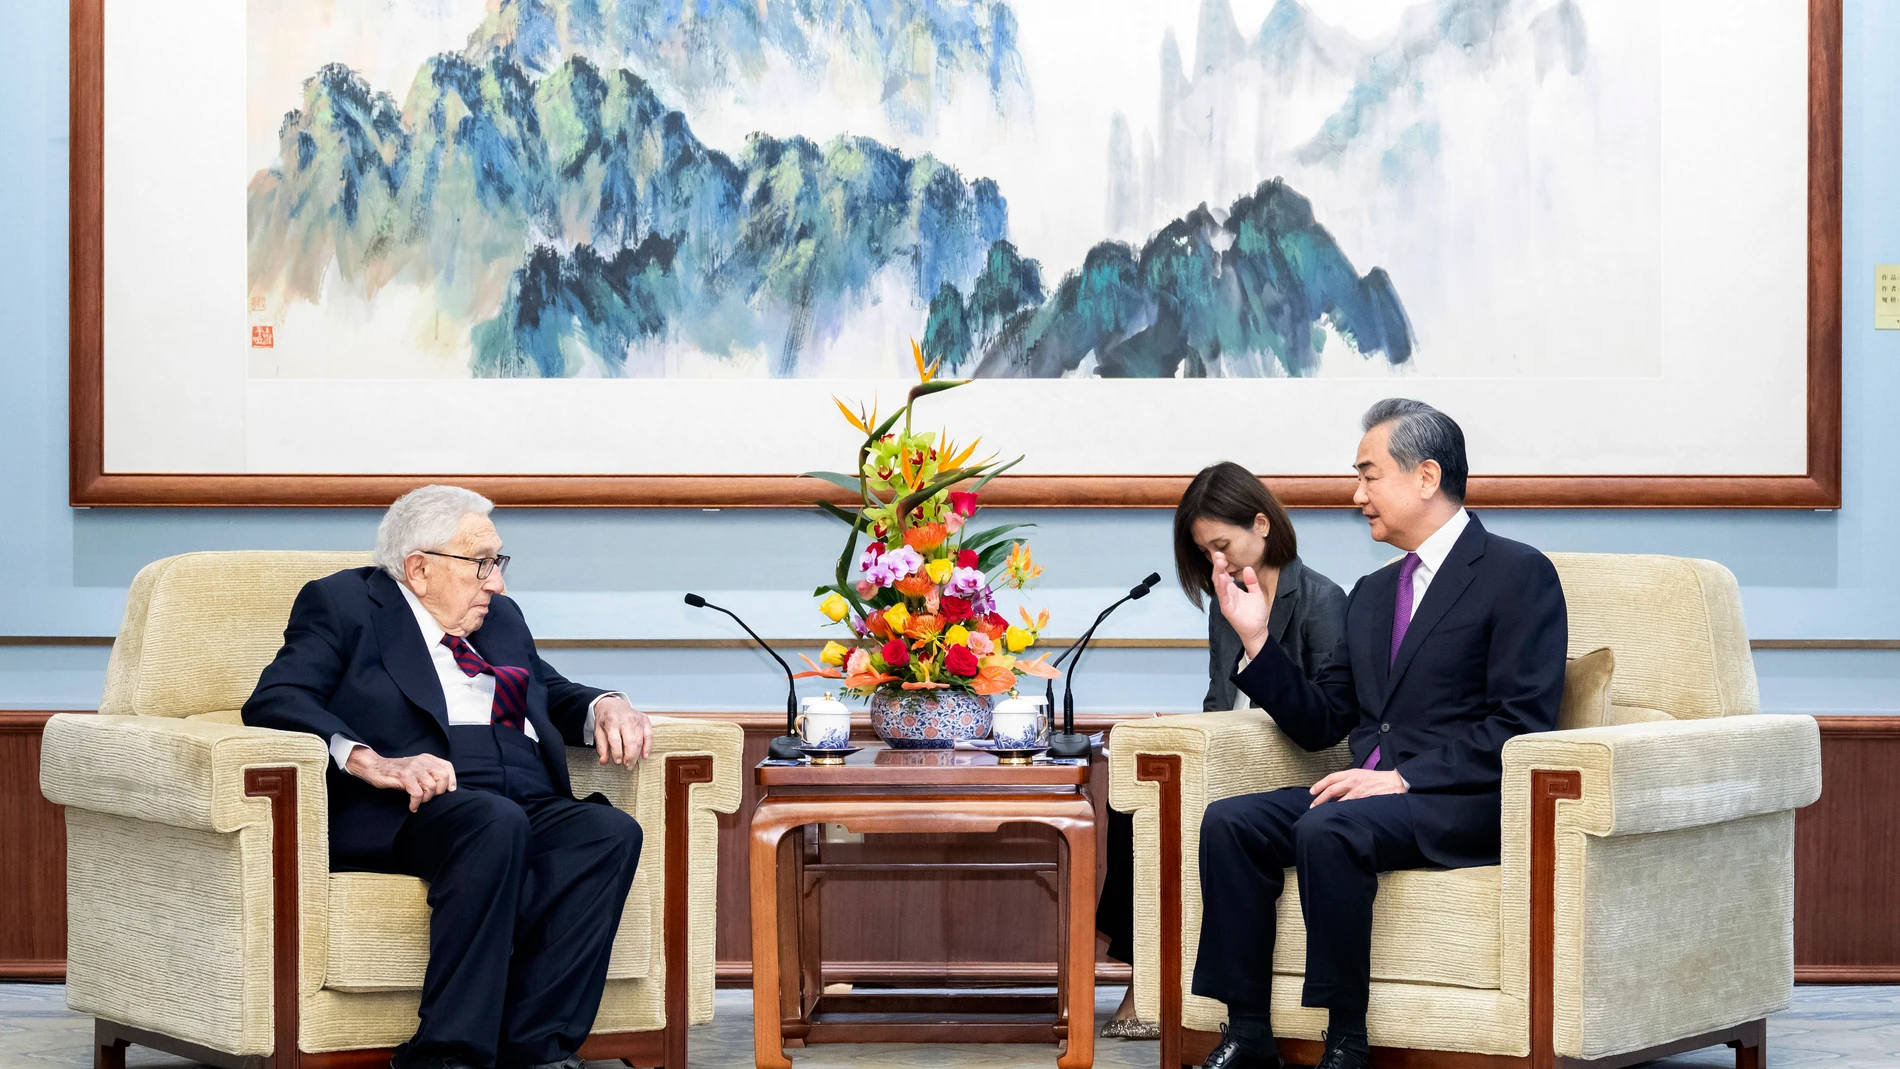 In this photo released by Xinhua News Agency, former Secretary of State Henry Kissinger, left, meets with the top diplomat of China's Communist Party, Wang Yi, in Beijing, Wednesday, July 19, 2023. Amid a steep downturn in relations with the United States, China has looked to a meeting with former U.S. national security adviser and Secretary of State Henry Kissinger to revive positive momentum. (Zhai Jianlan/Xinhua via AP)